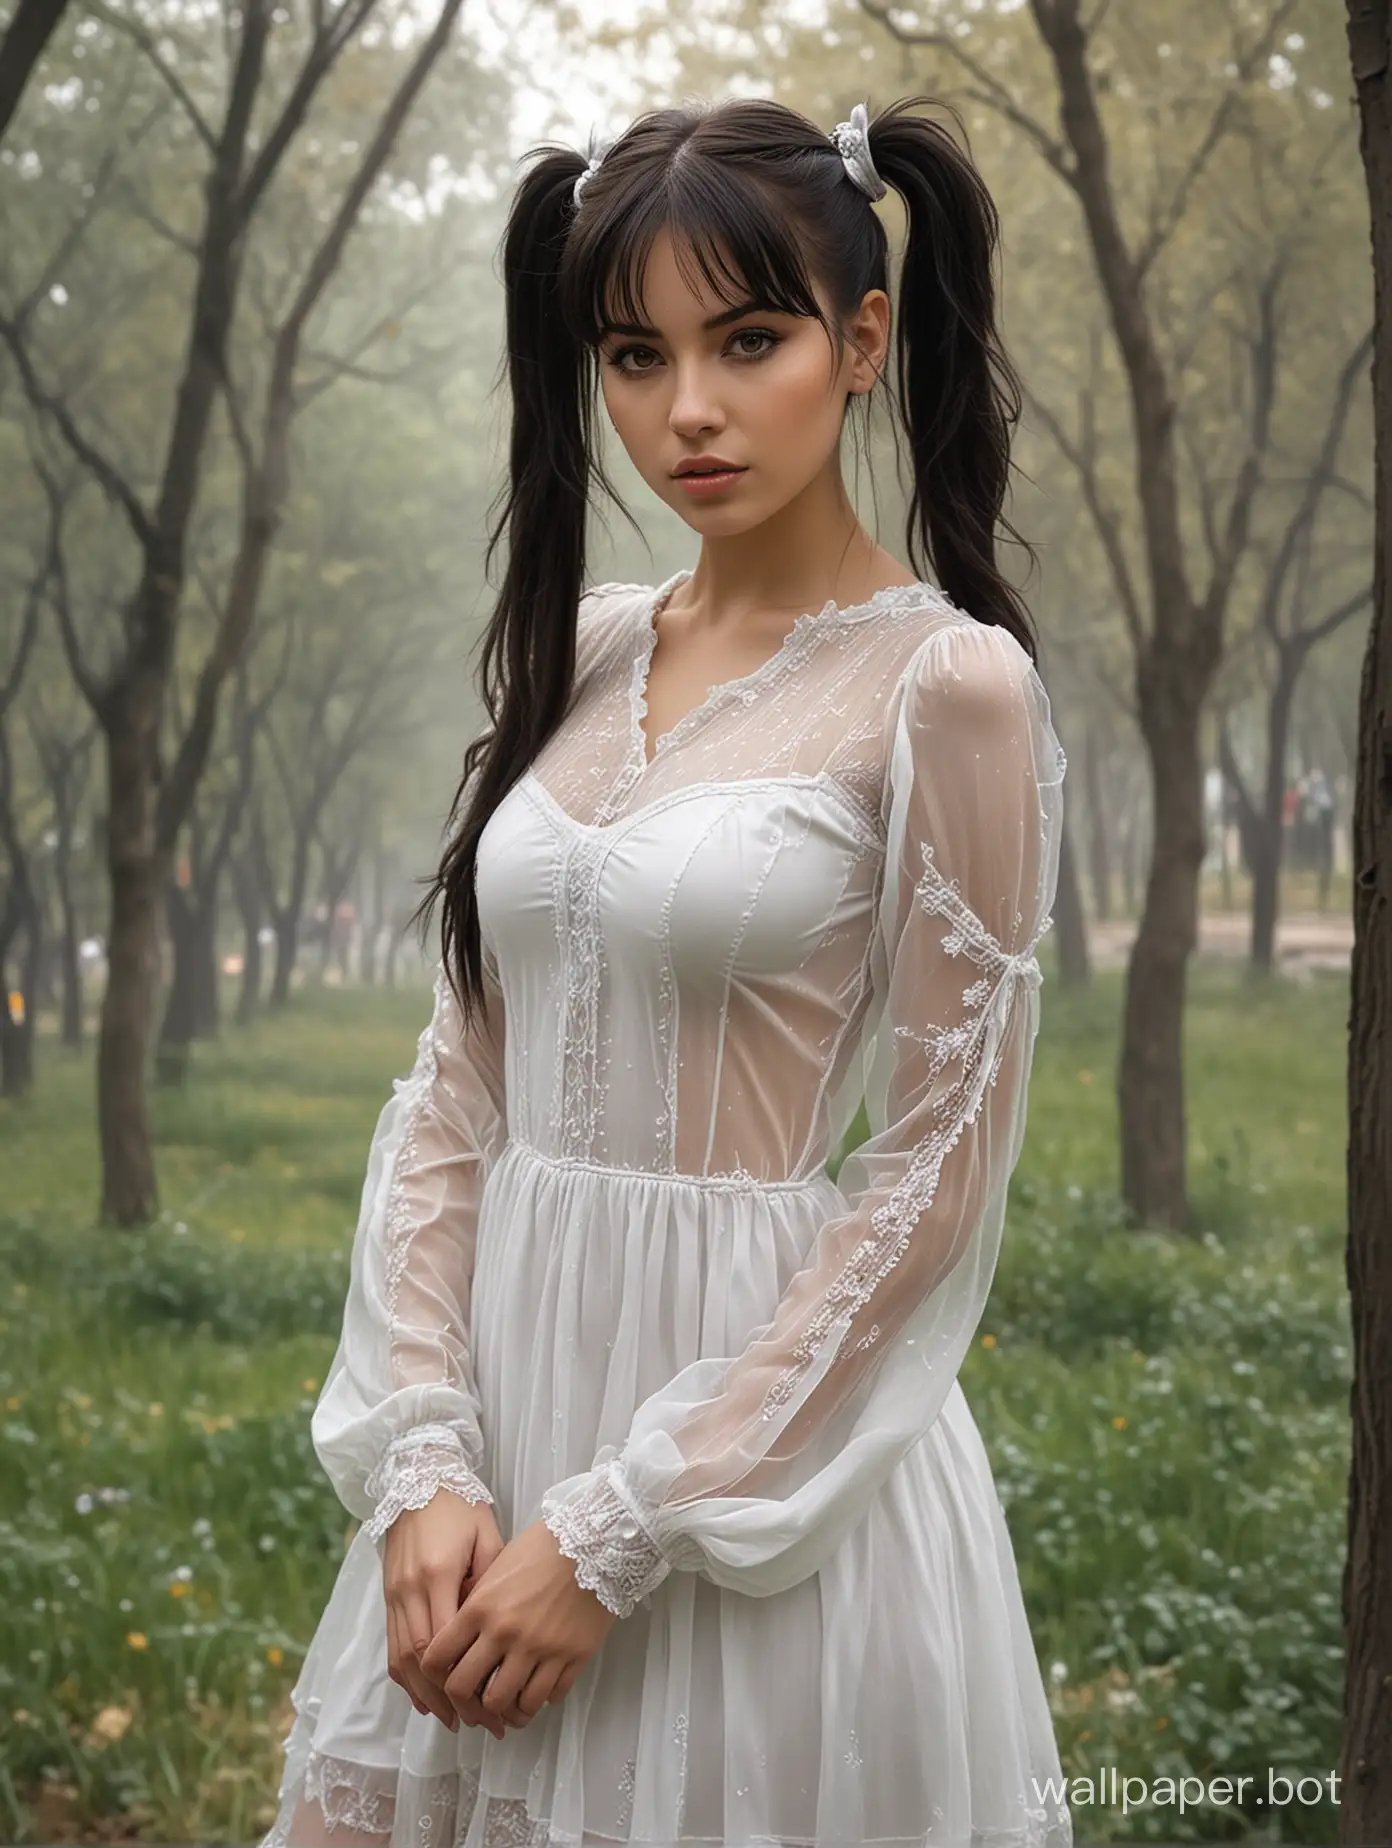 Oksana Pochepa 25 years old dark hair with pigtails 6 breast size narrow waist In a white transparent dress holding In the park high realism Style Luis Royo